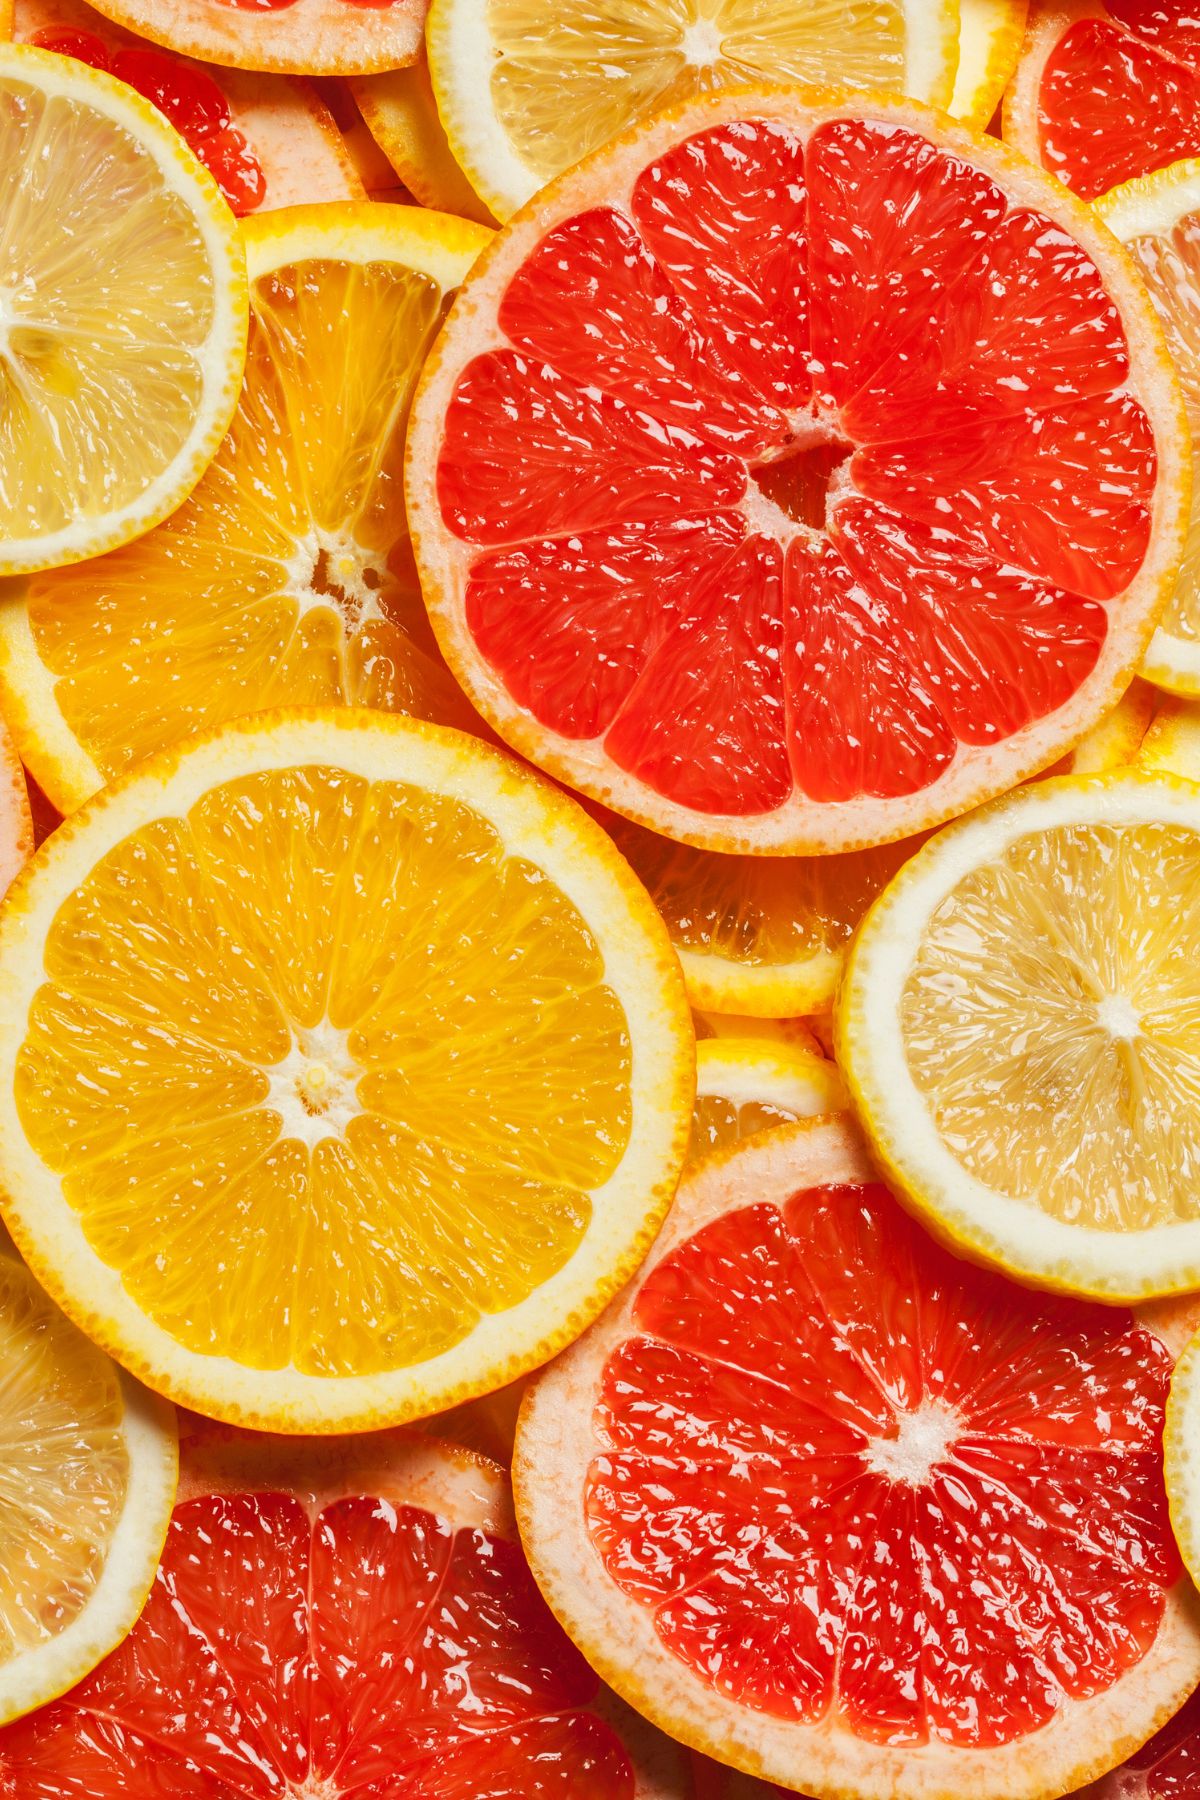 various slices of orange fruits stacked on top of each other.